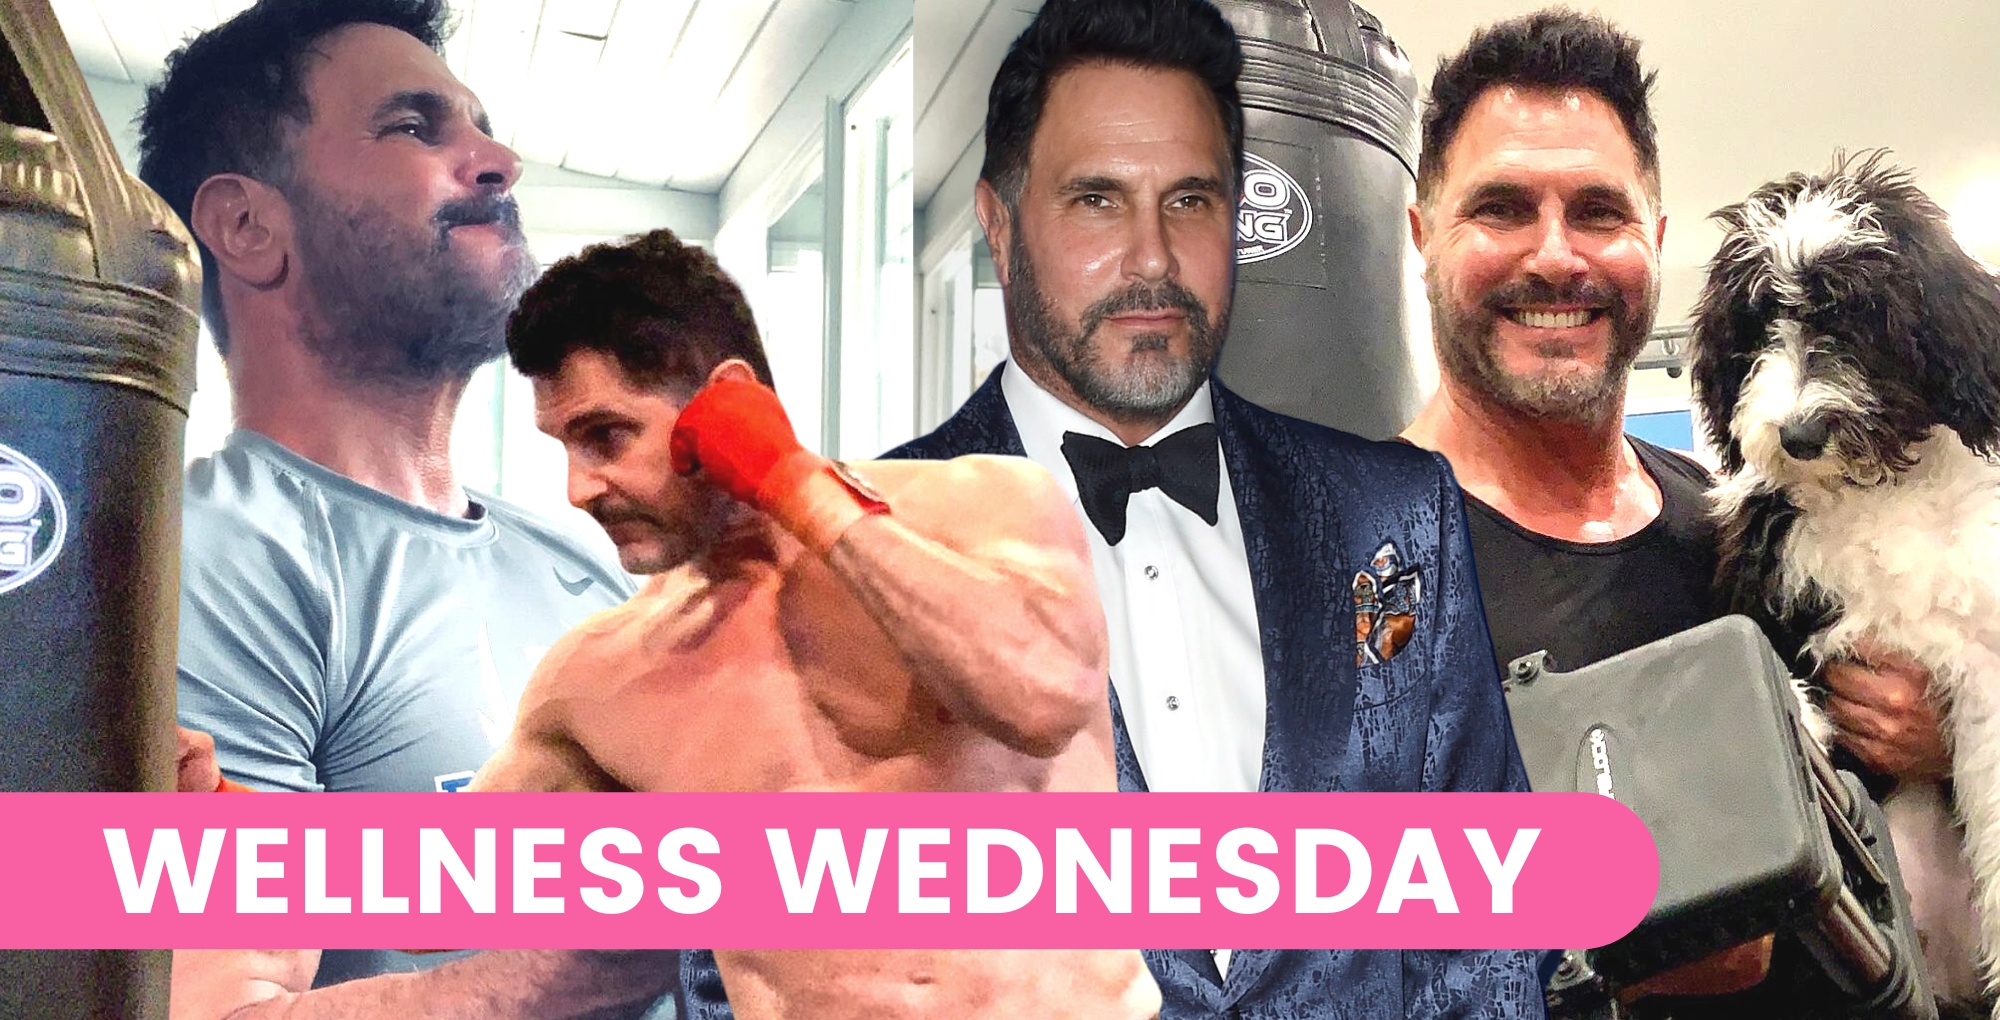 don diamont from bold and the beautiful in various workout images and in a tux